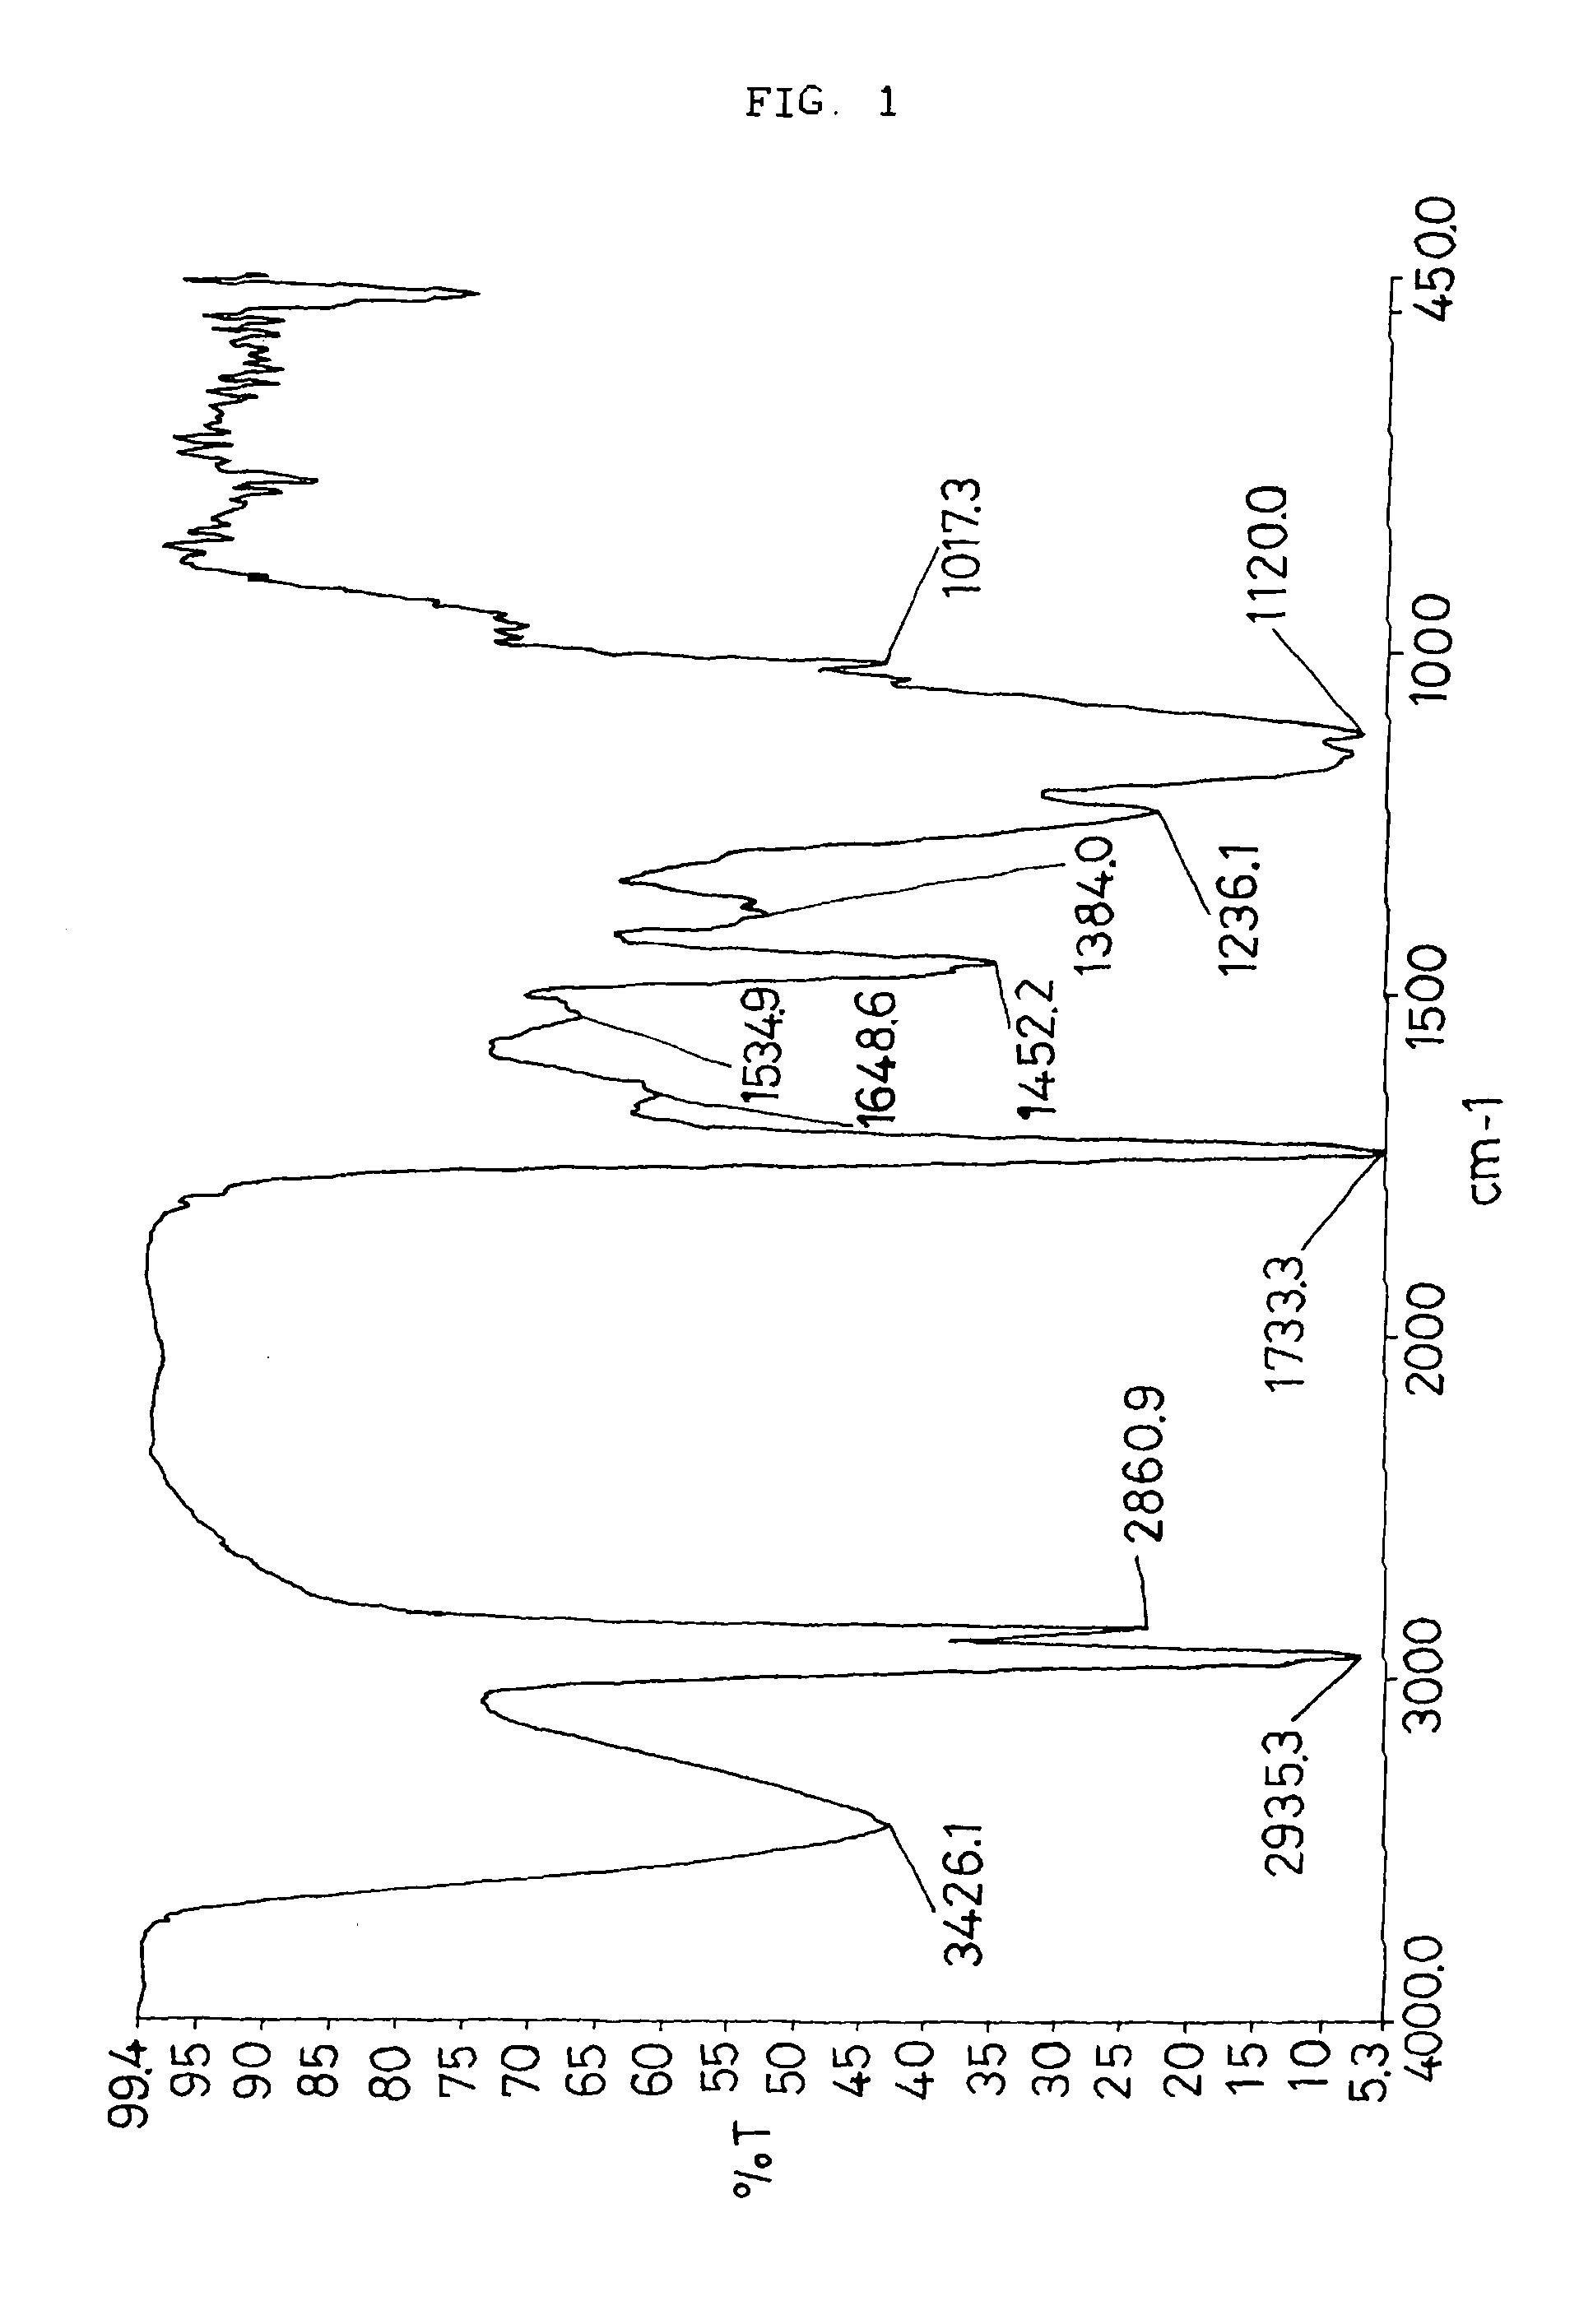 Vinyl-urethane copolymers with intermediary linkage segments having silicon-oxygen bonds and production methods thereof